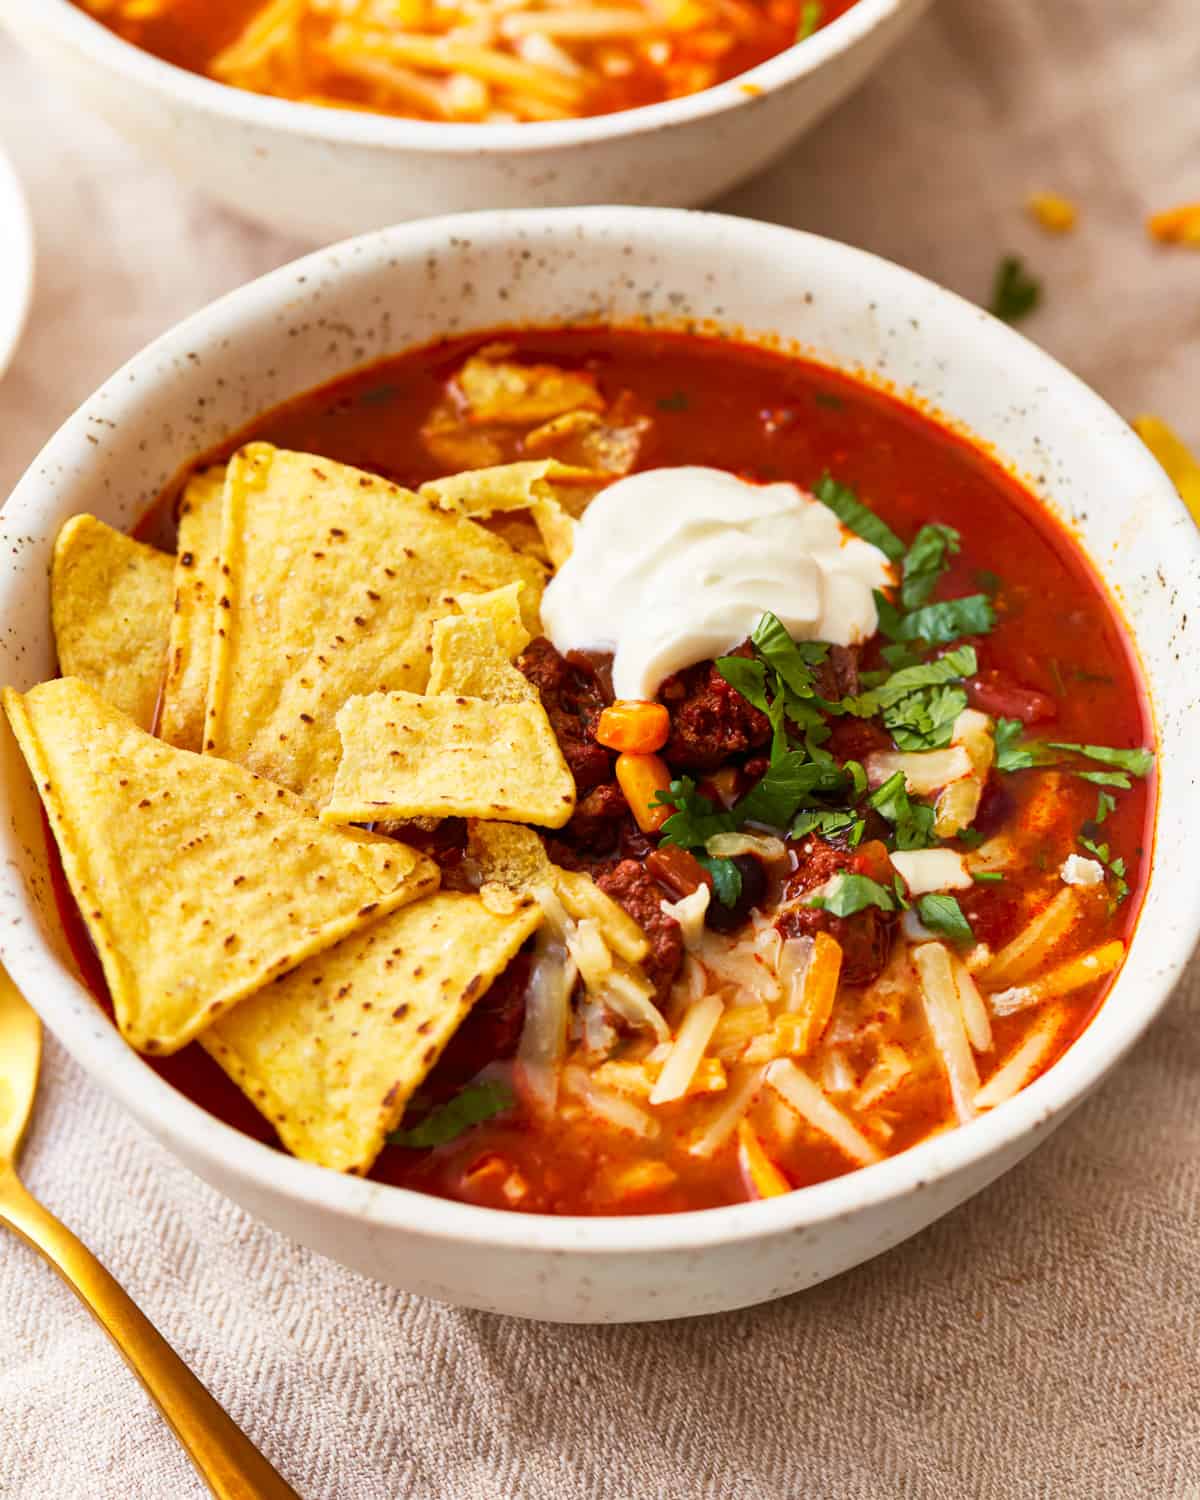 A bowl of tortilla soup with ground beef, cheese, tortilla chips, and sour cream.